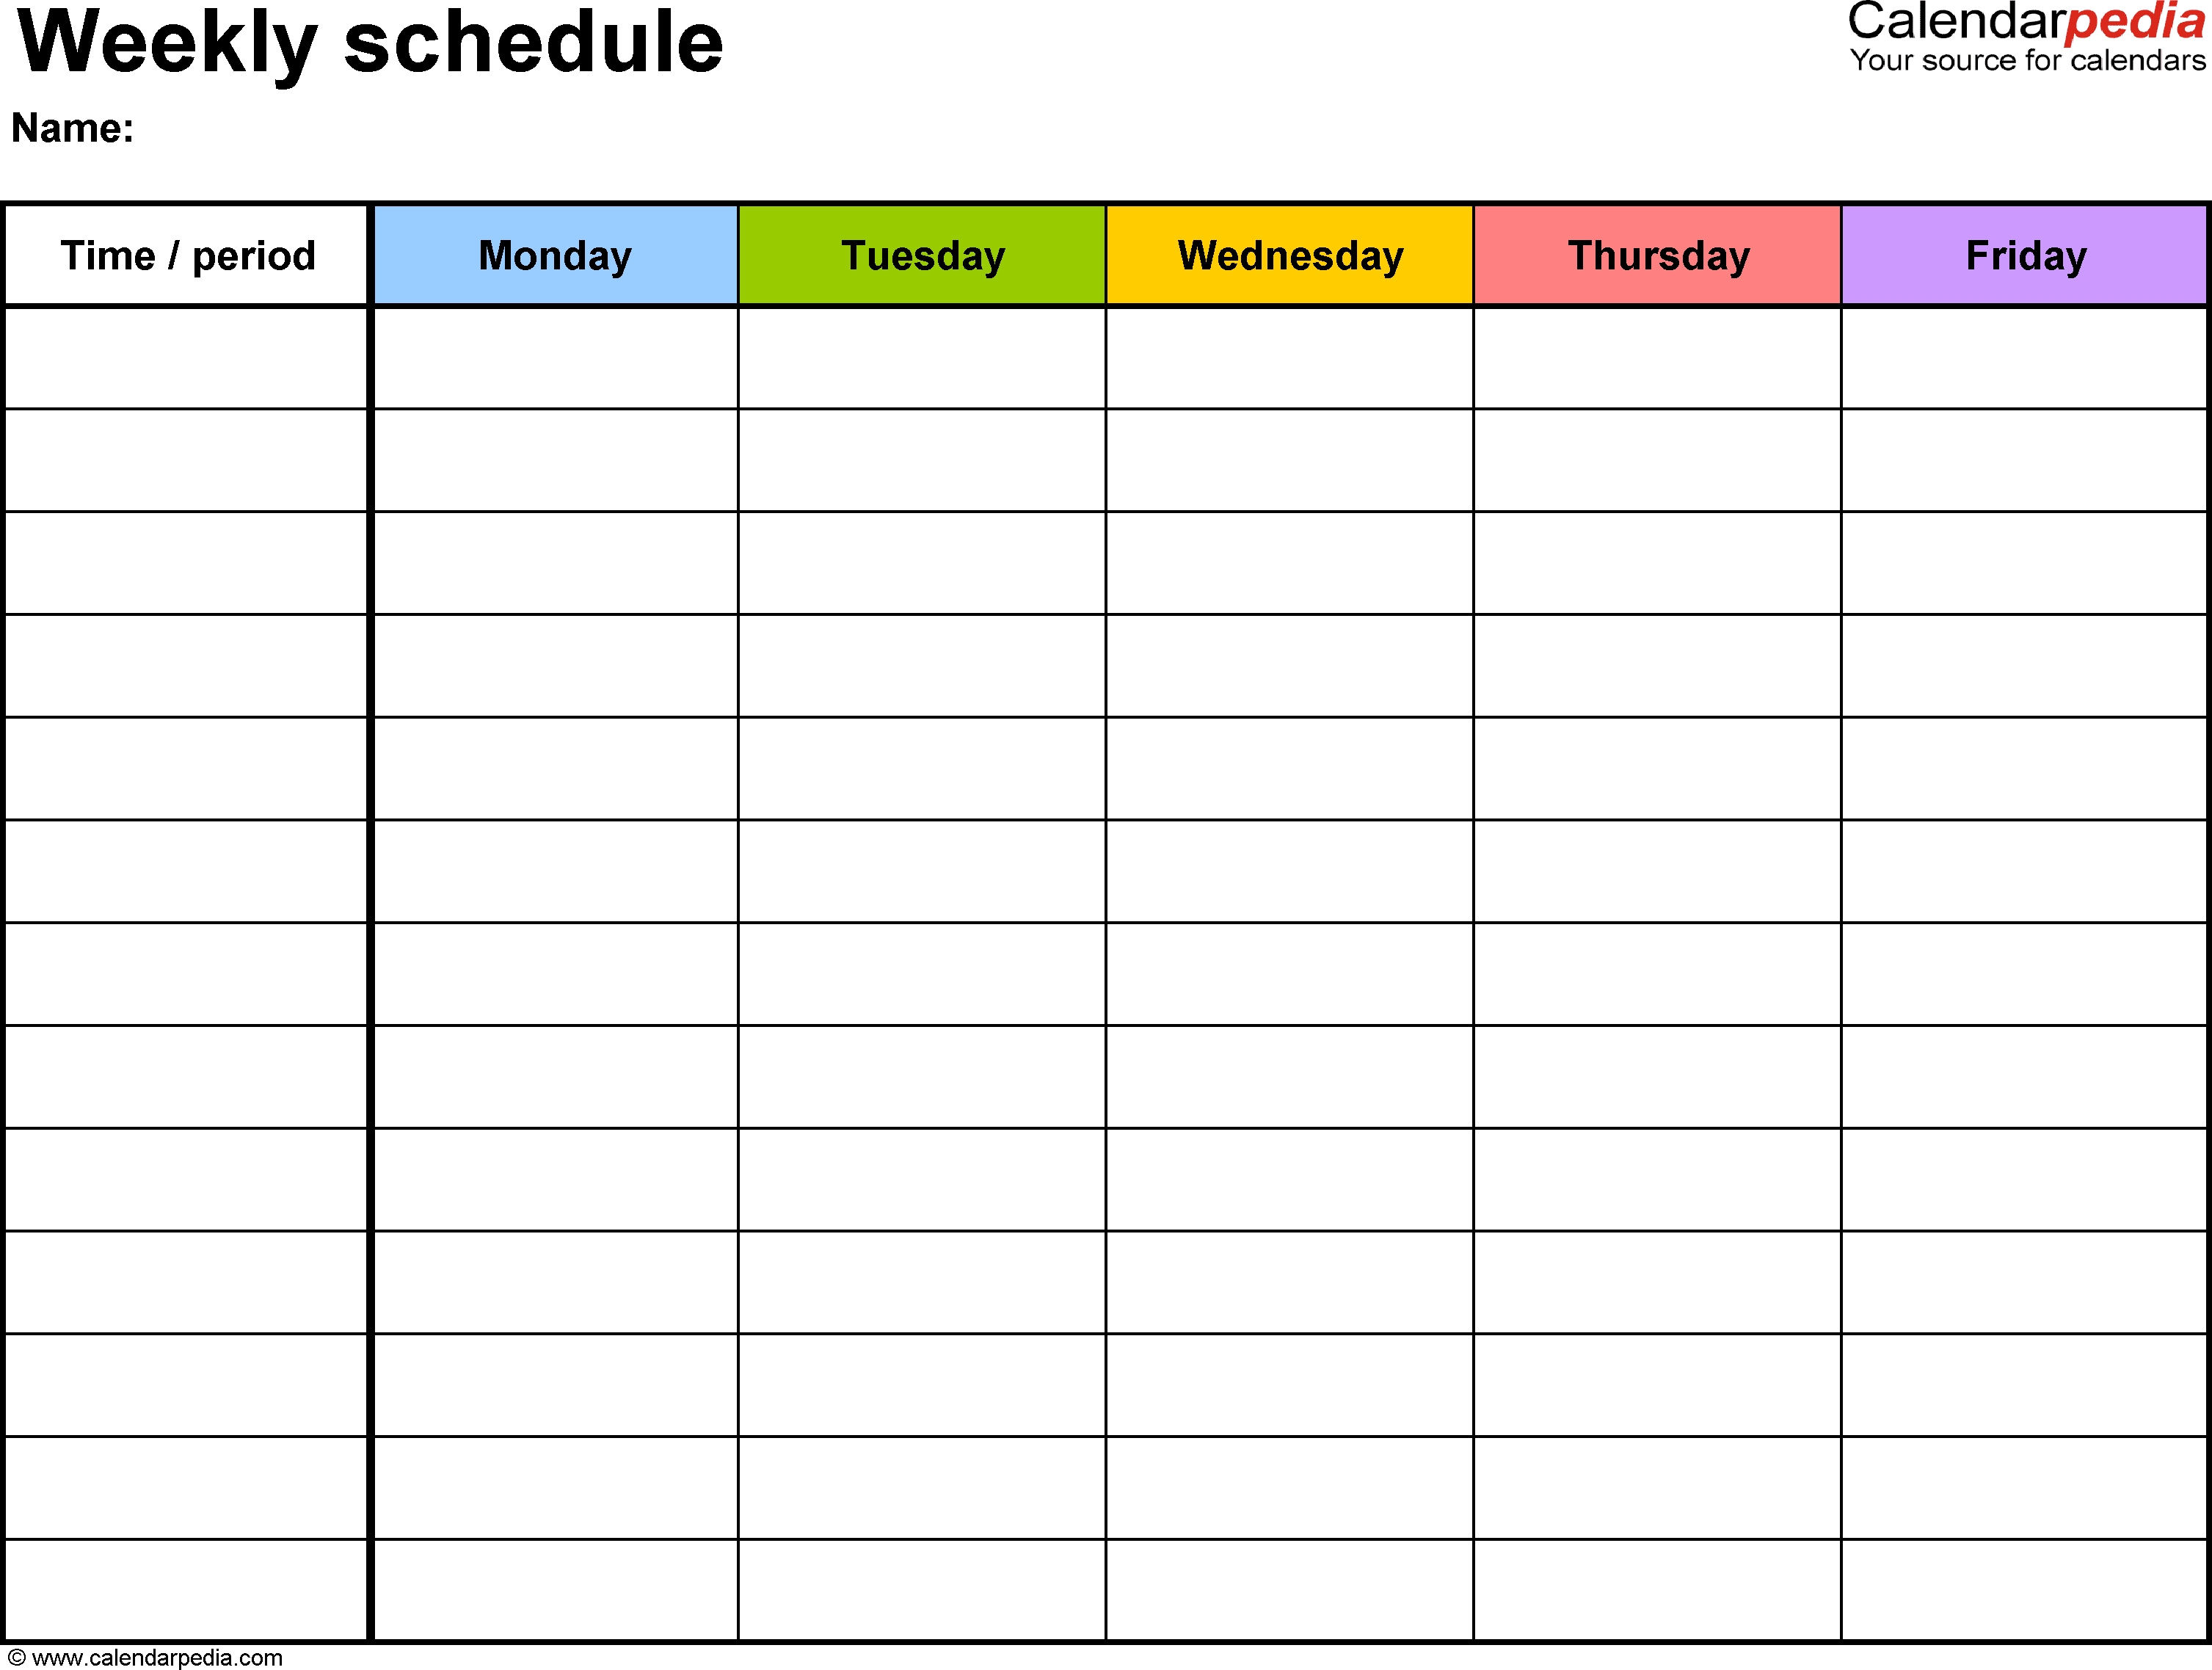 Free Weekly Schedule Templates For Word - 18 Templates 5 Day Calendar Template